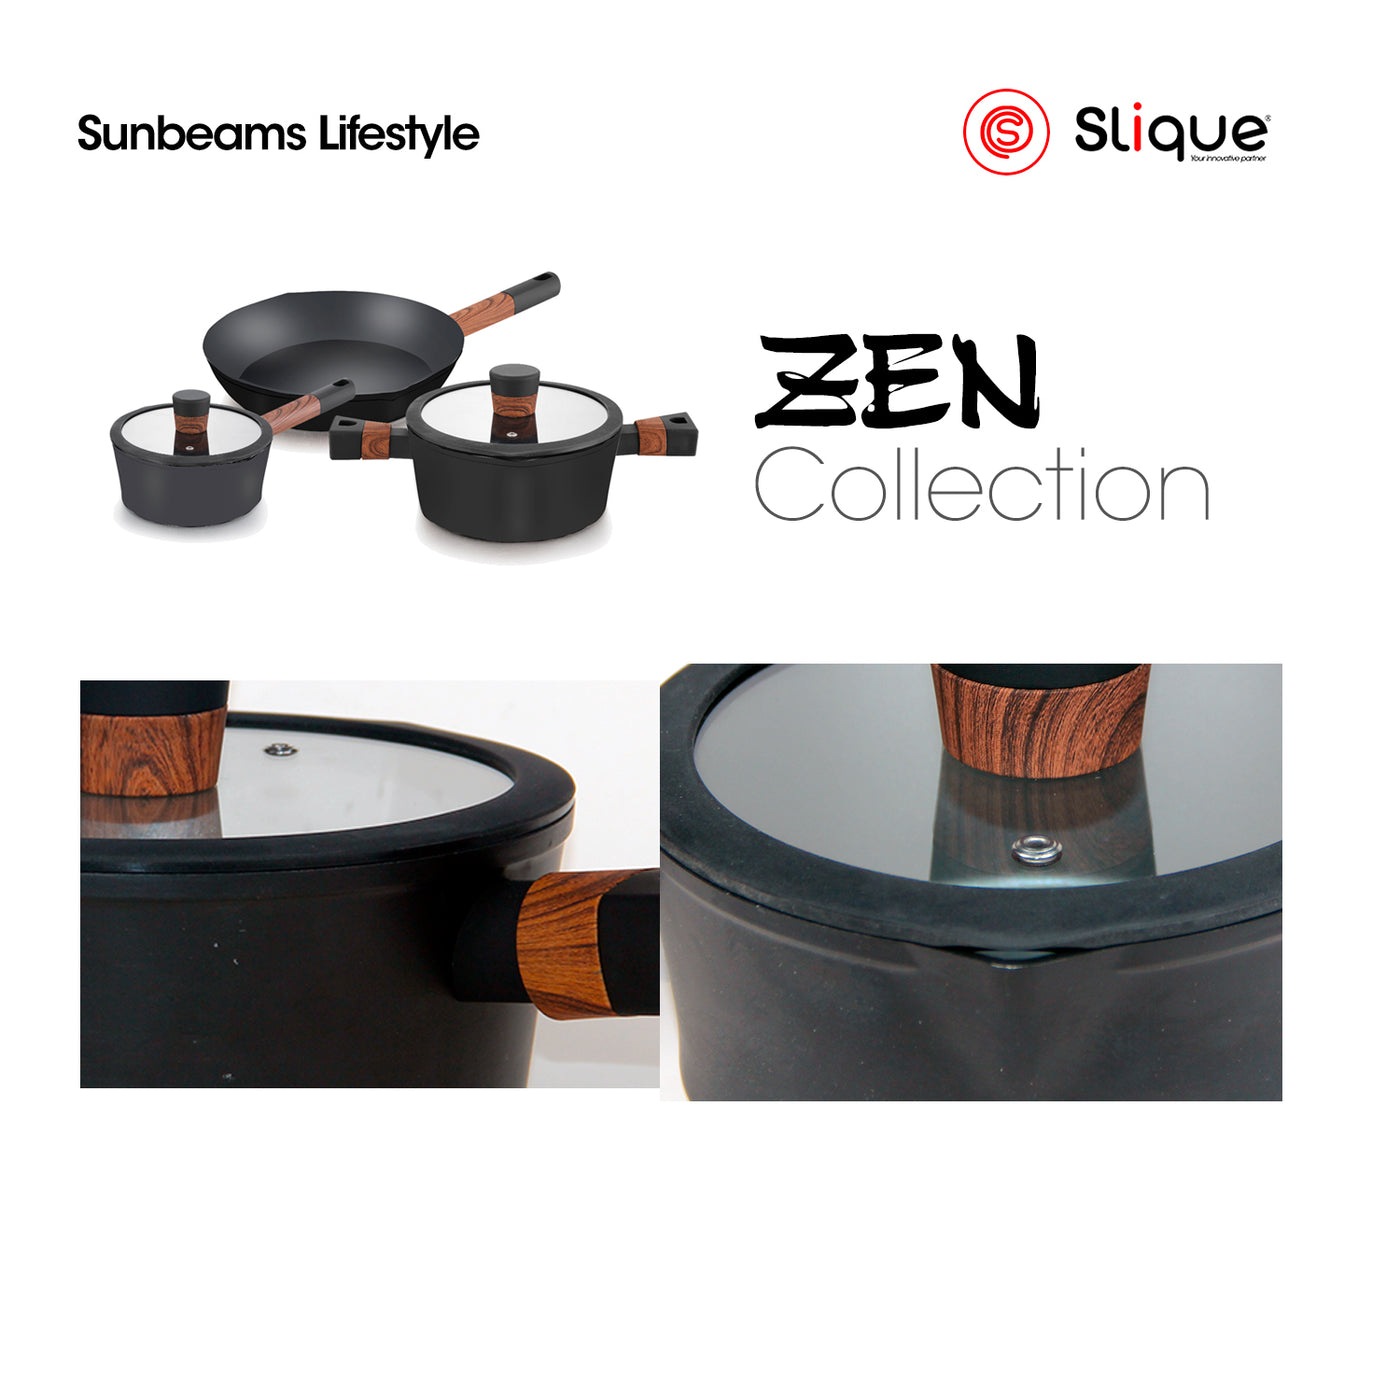 SLIQUE Zen Collection Cookware [Set of 8] Fry Pan | Dutch Oven | Saucepan | Kitchen Tools Non-stick | Induction Amazing Gift Idea For Any Occasion!